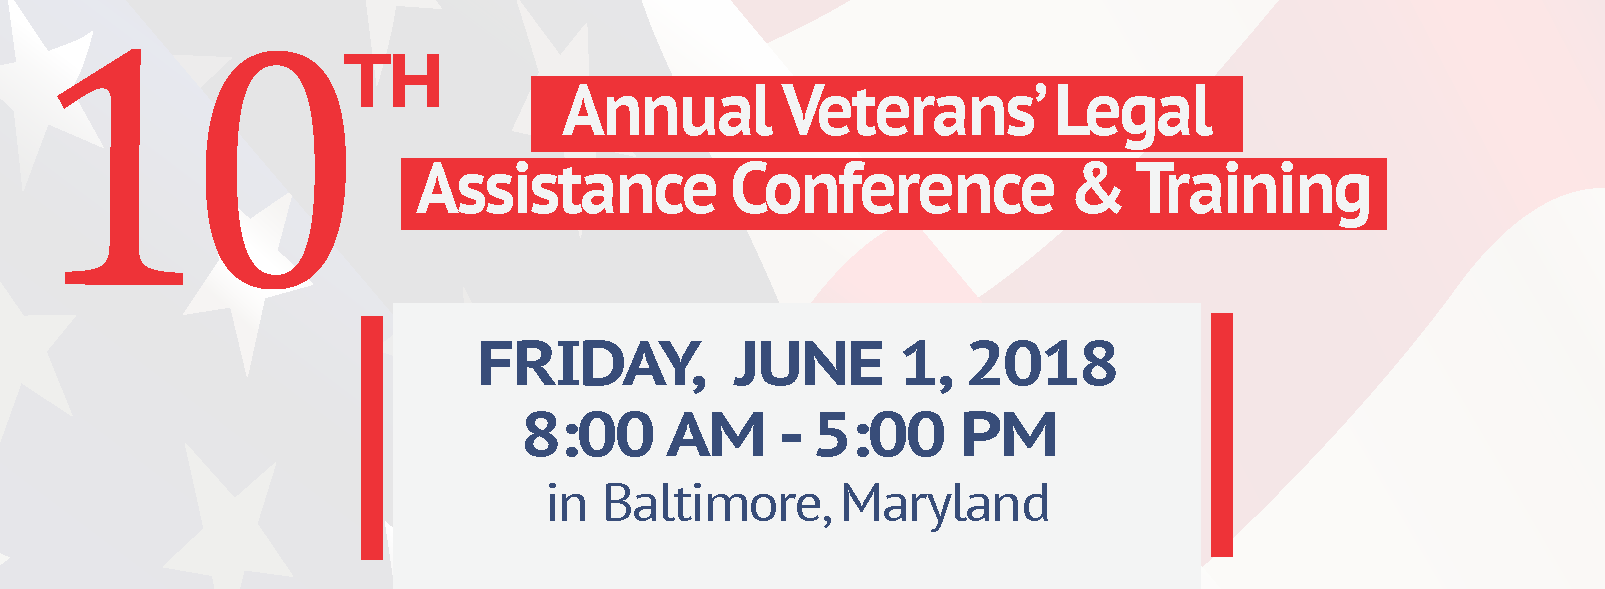 Veterans Benefits 101 At The 10th Annual Veterans Legal